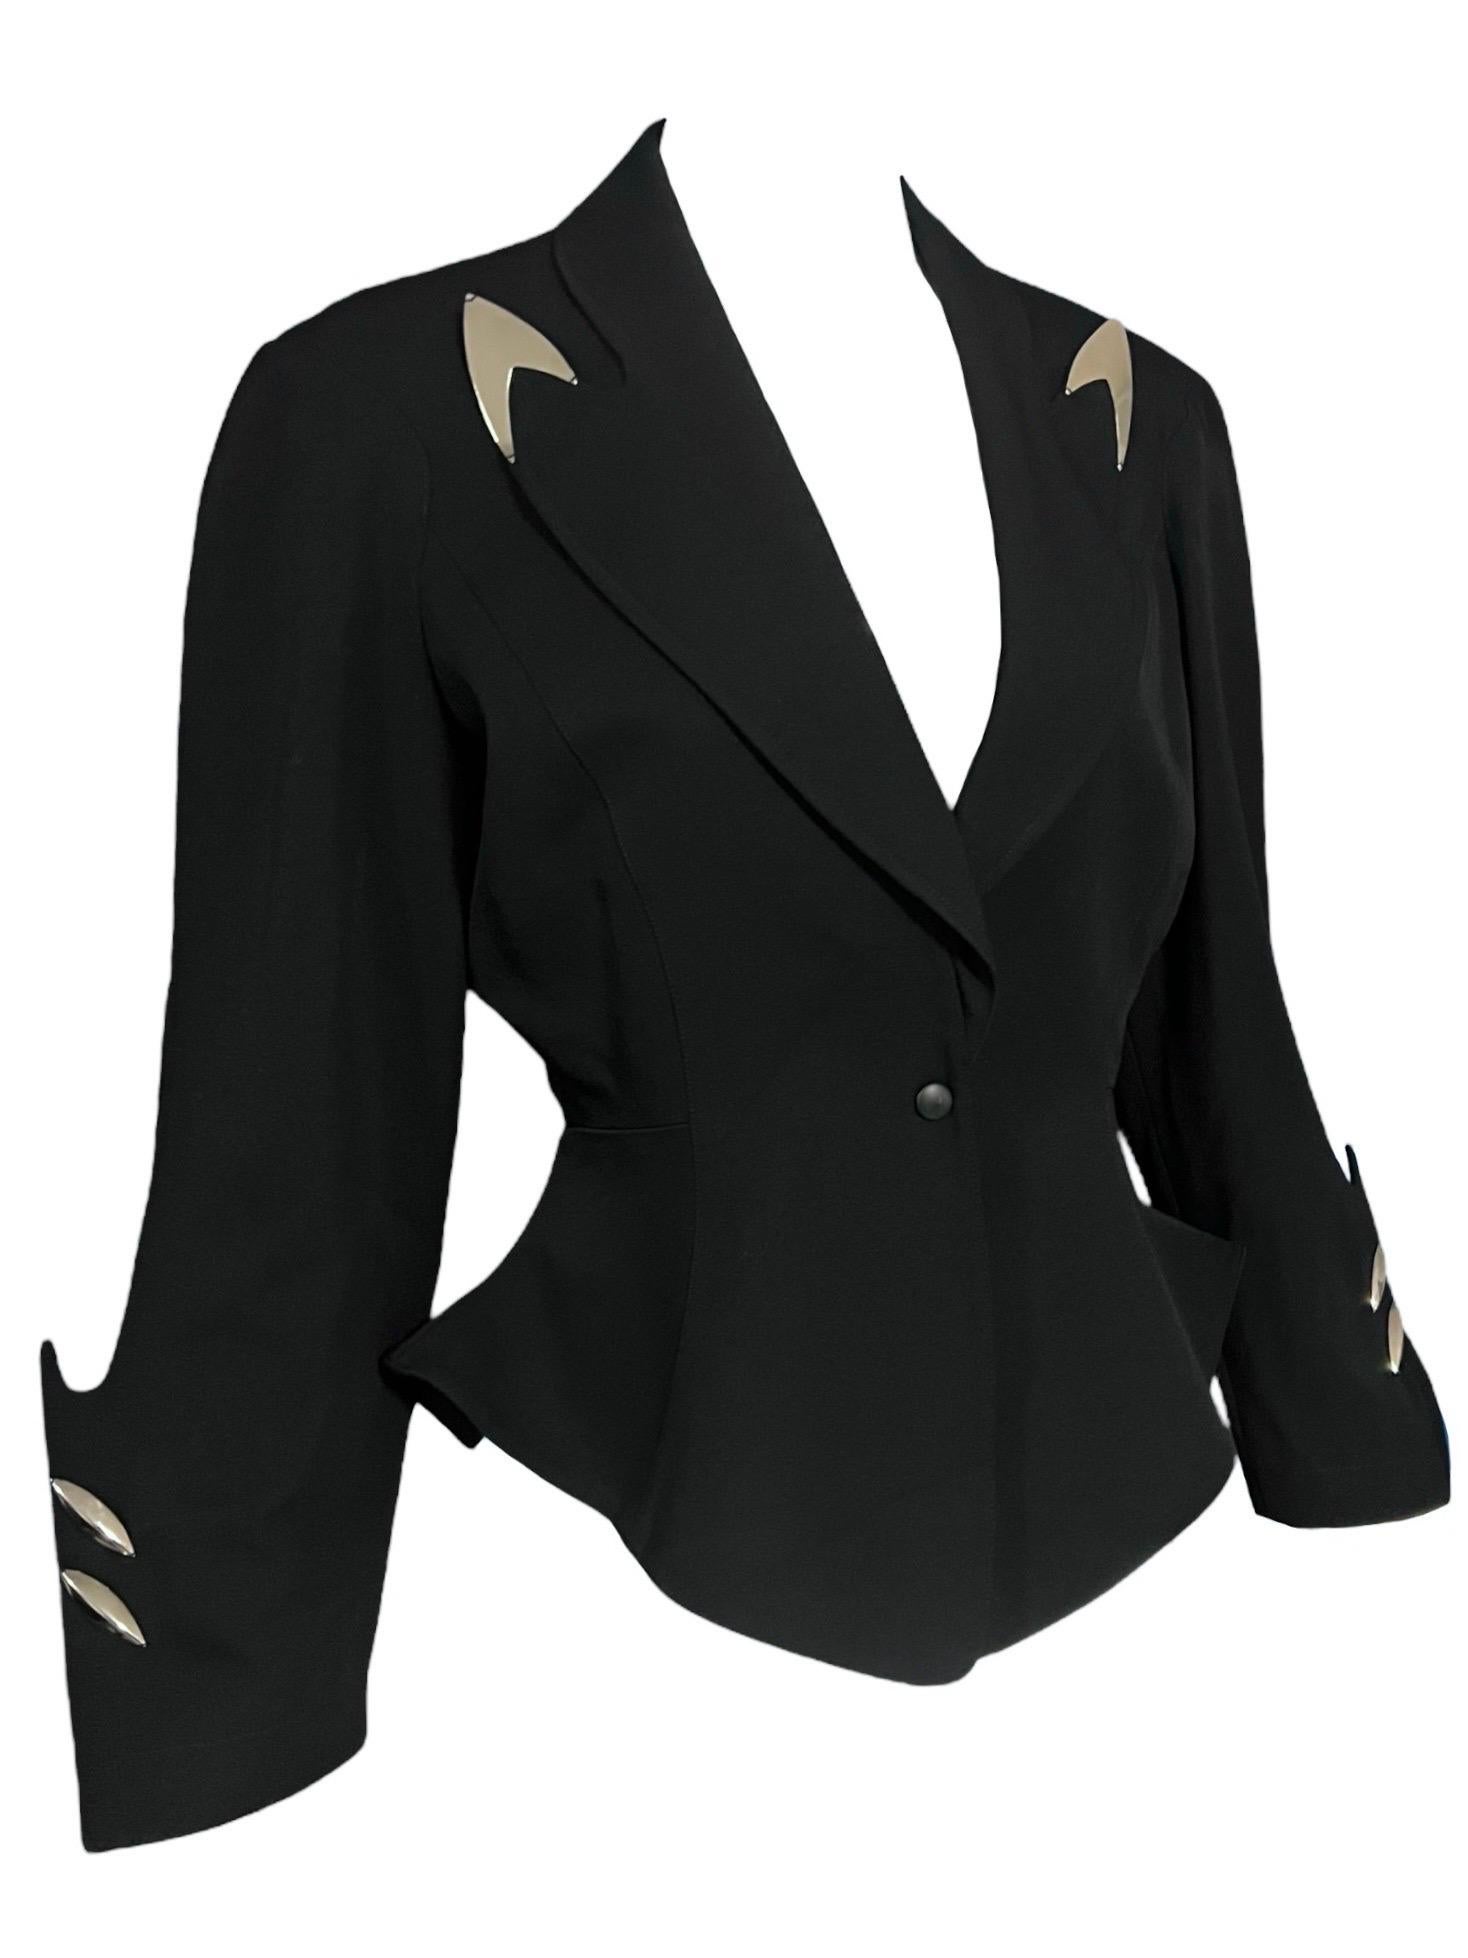 F/W 1989 Thierry Mugler Black Futuristic Bullet Metal Runway Jacket  In Excellent Condition For Sale In Concord, NC